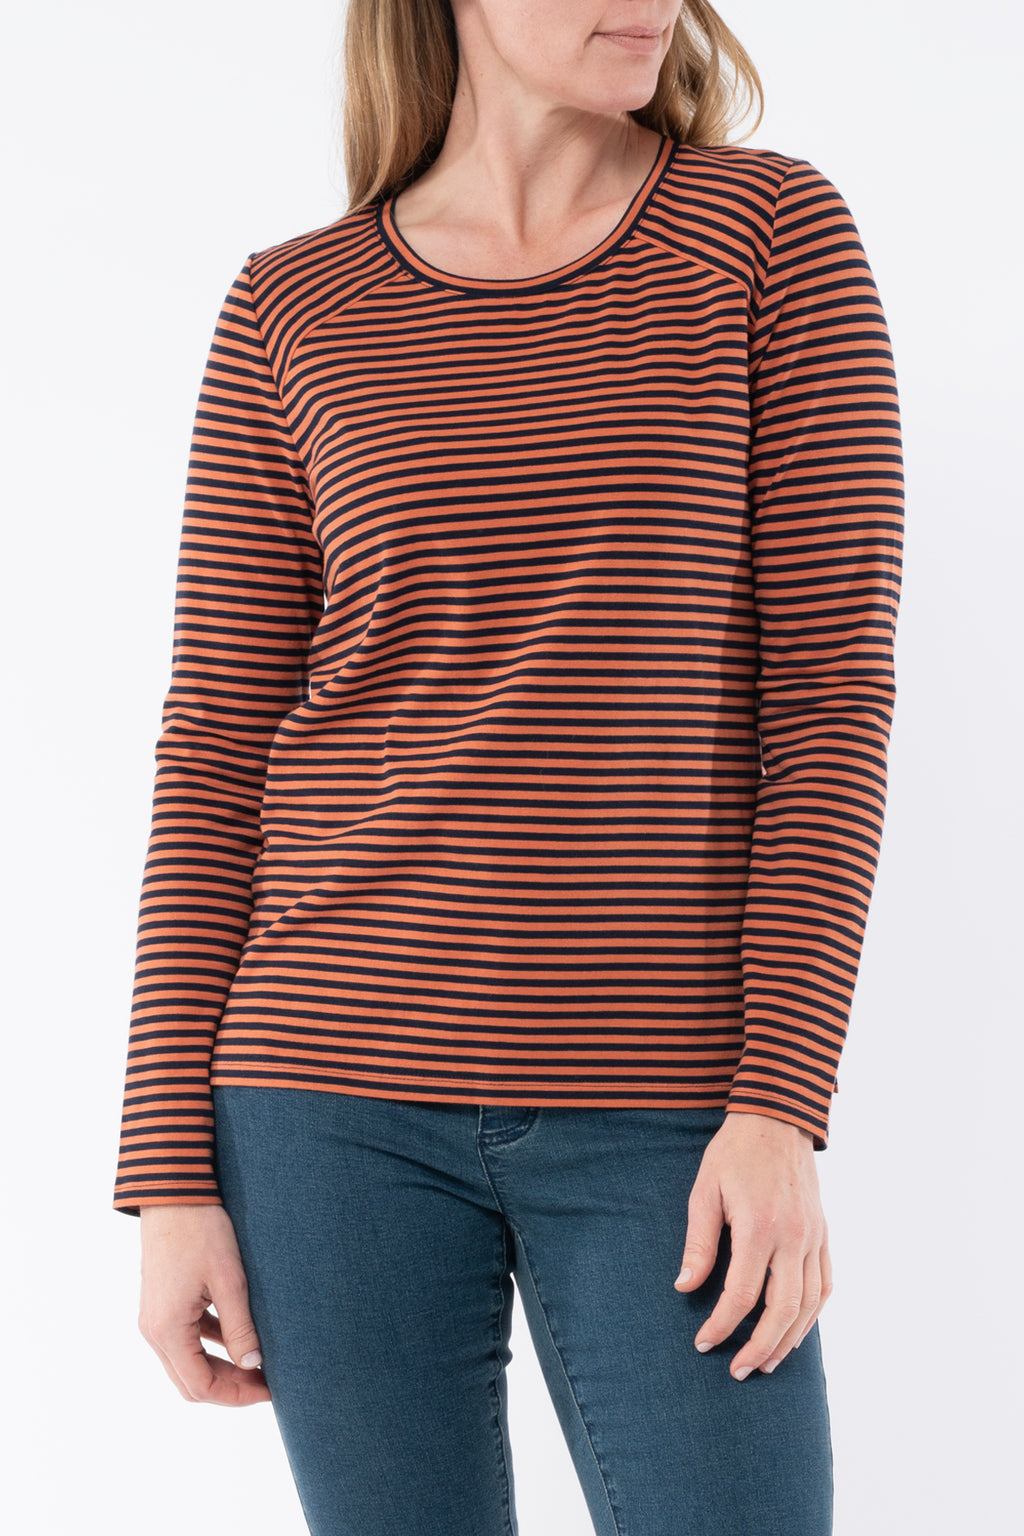 Jump navy and spice stripe tee